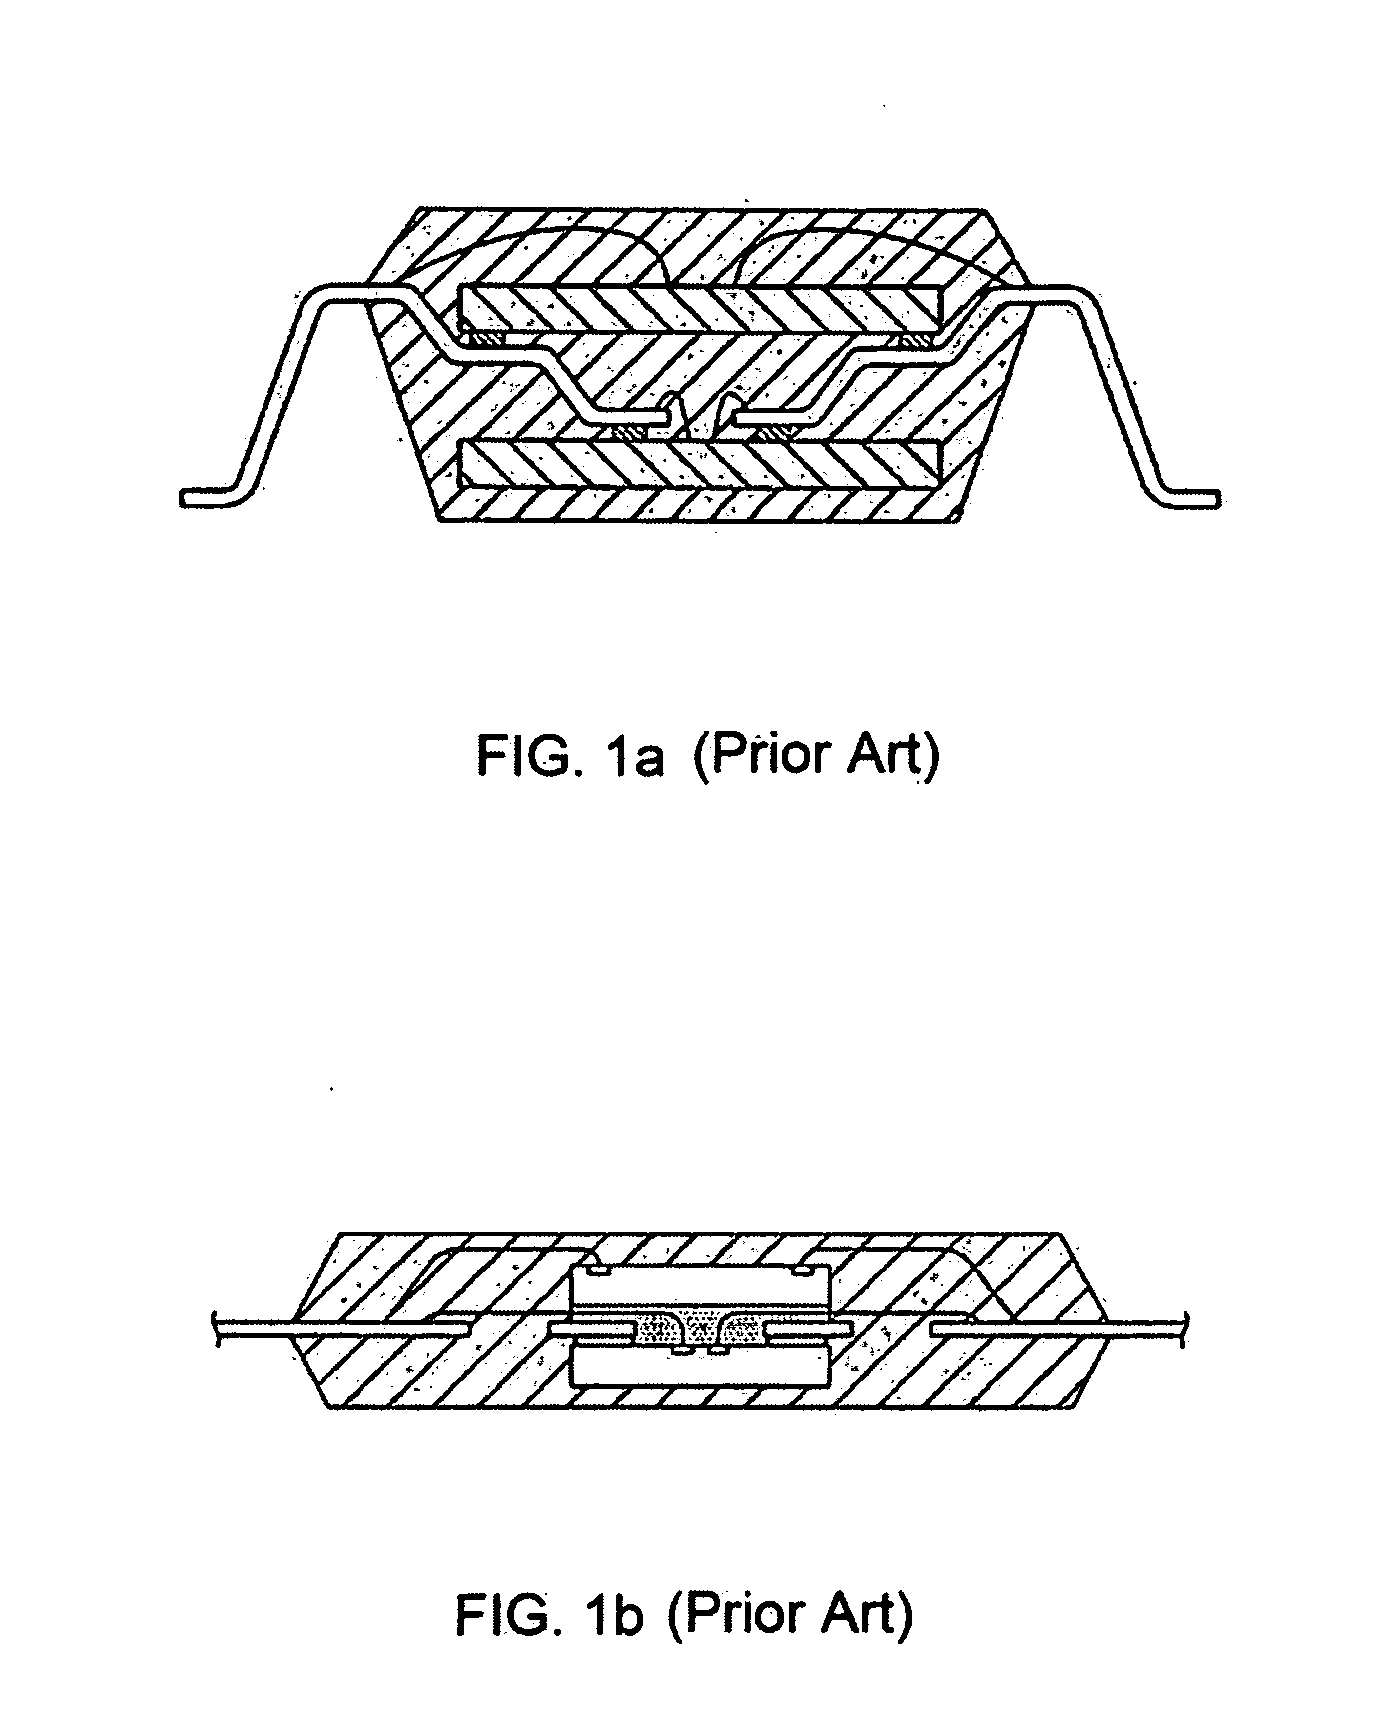 Multi-Chip Stacked Package Structure